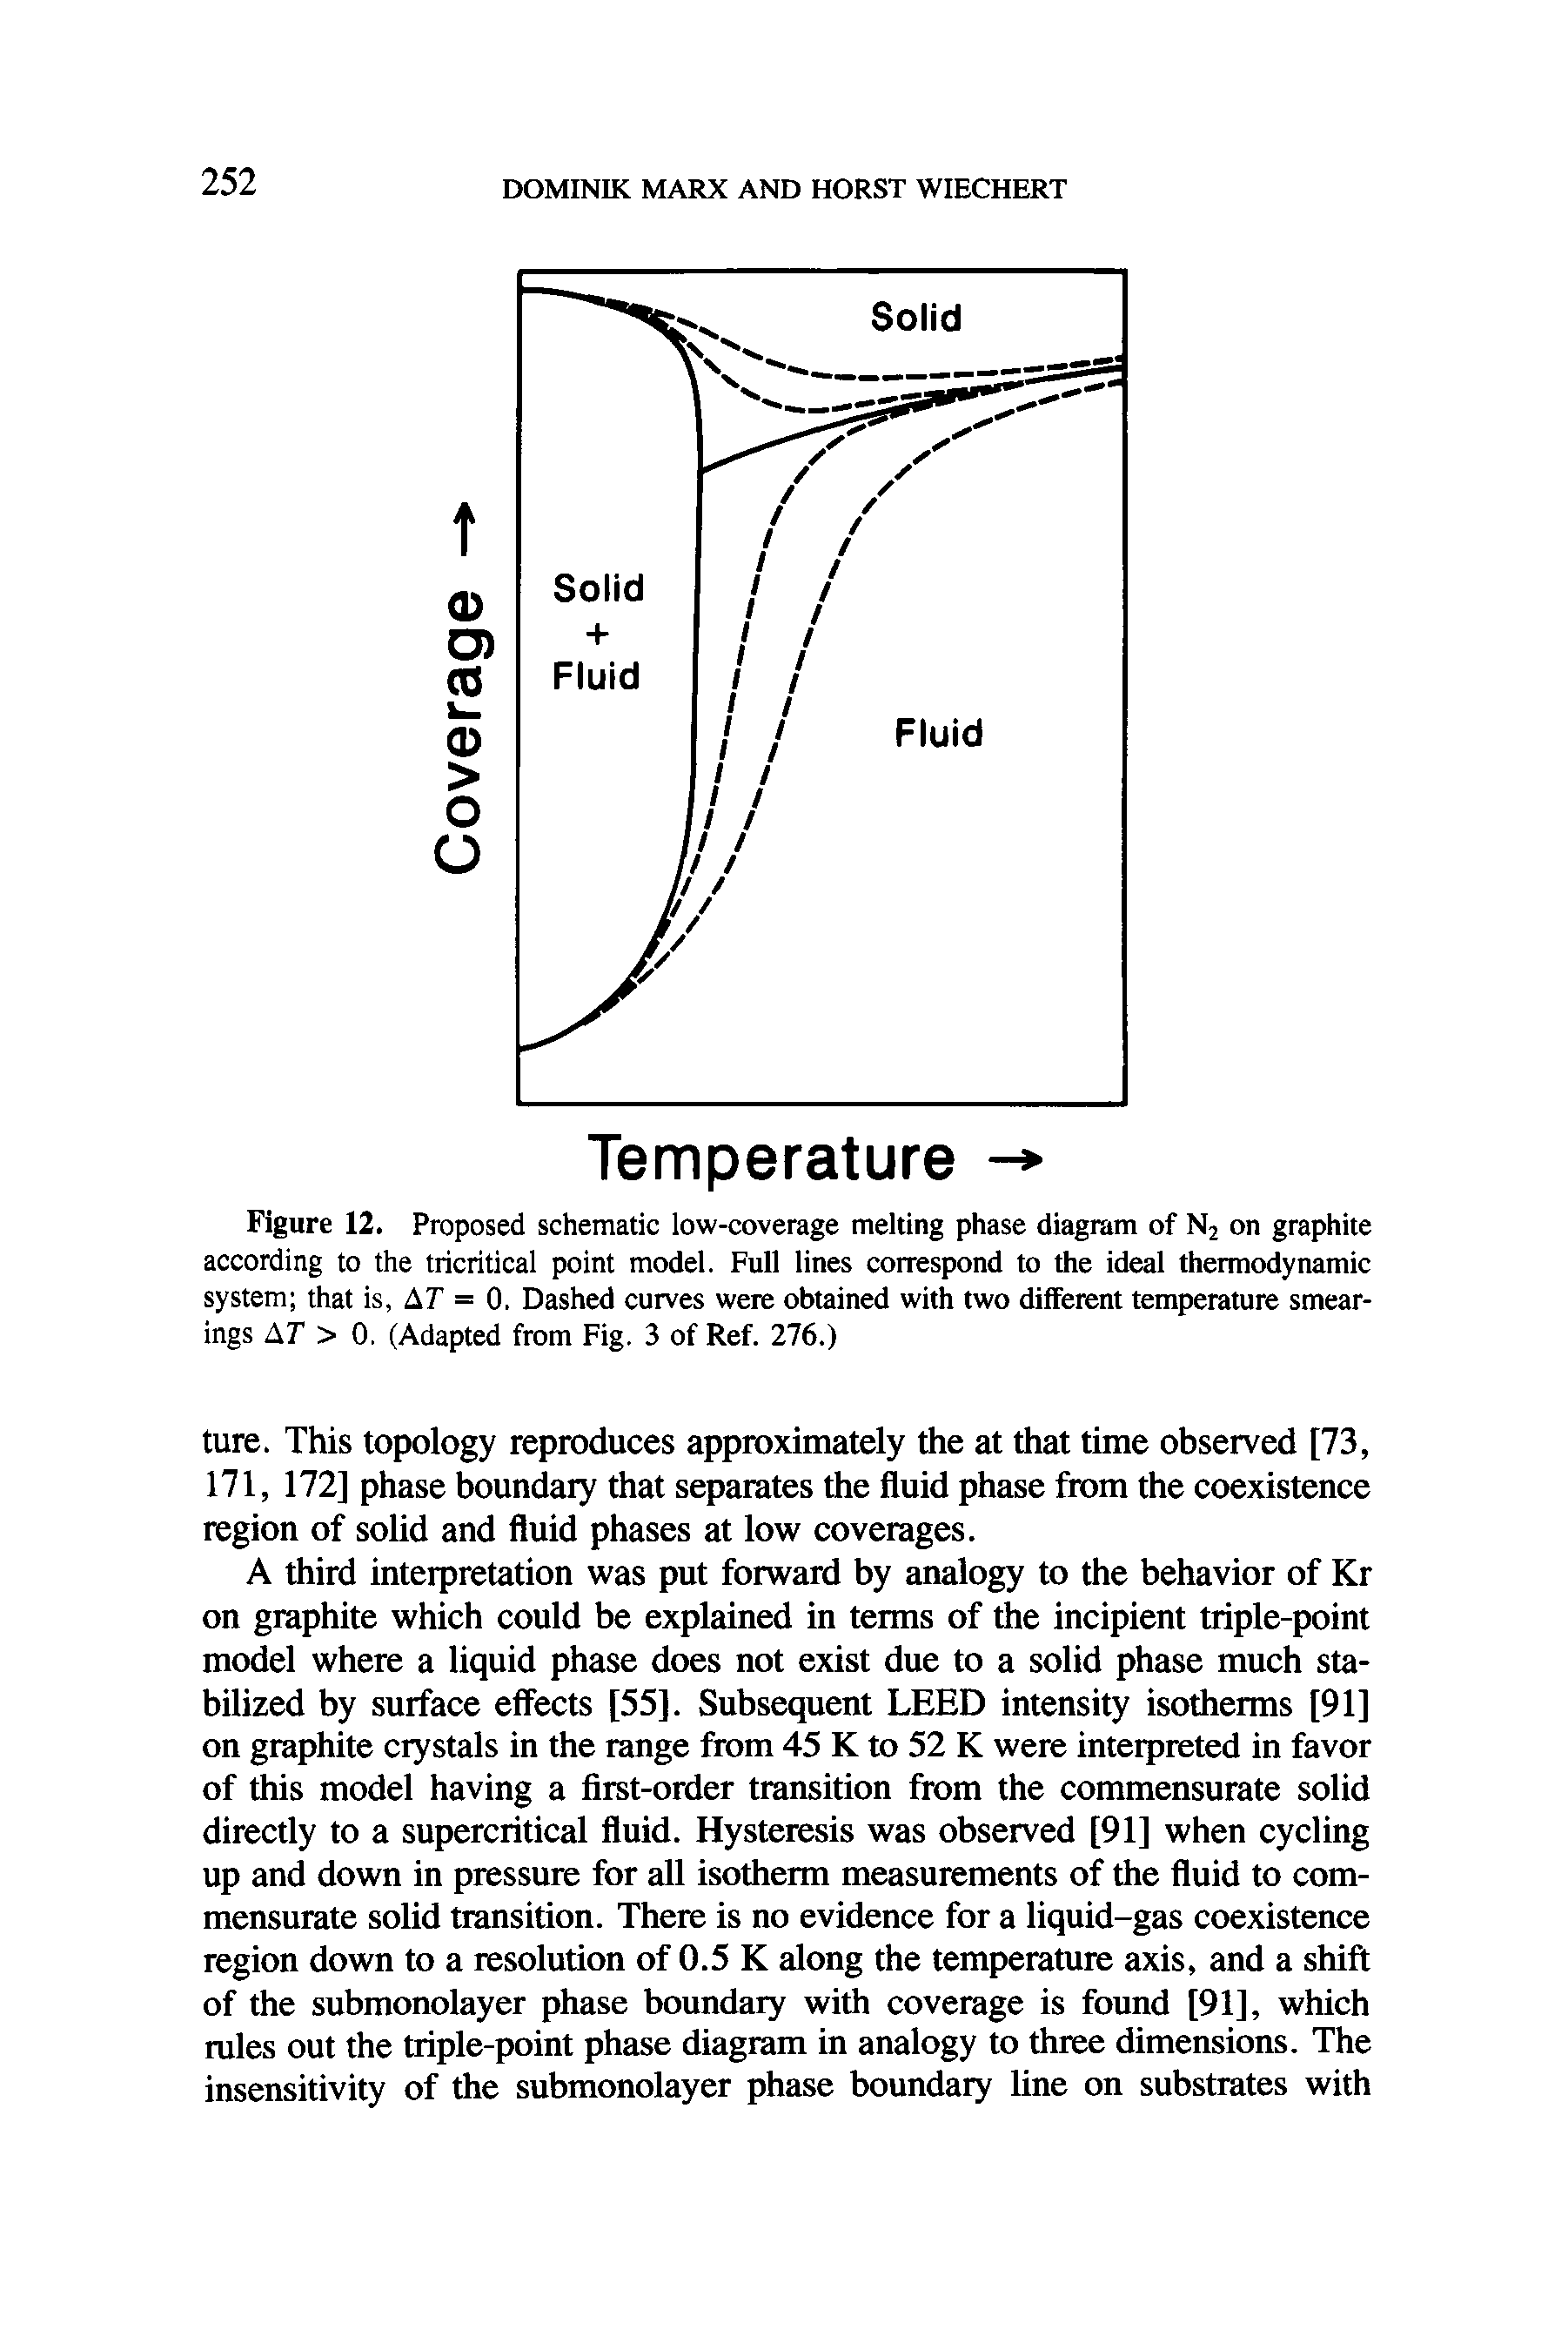 Figure 12. Proposed schematic low-coverage melting phase diagram of N2 on graphite according to the tricritical point model. Full lines correspond to the ideal thermodynamic system that is, AT = 0. Dashed curves were obtained with two different temperature smear-ings AT > 0. (Adapted from Fig. 3 of Ref. 276.)...